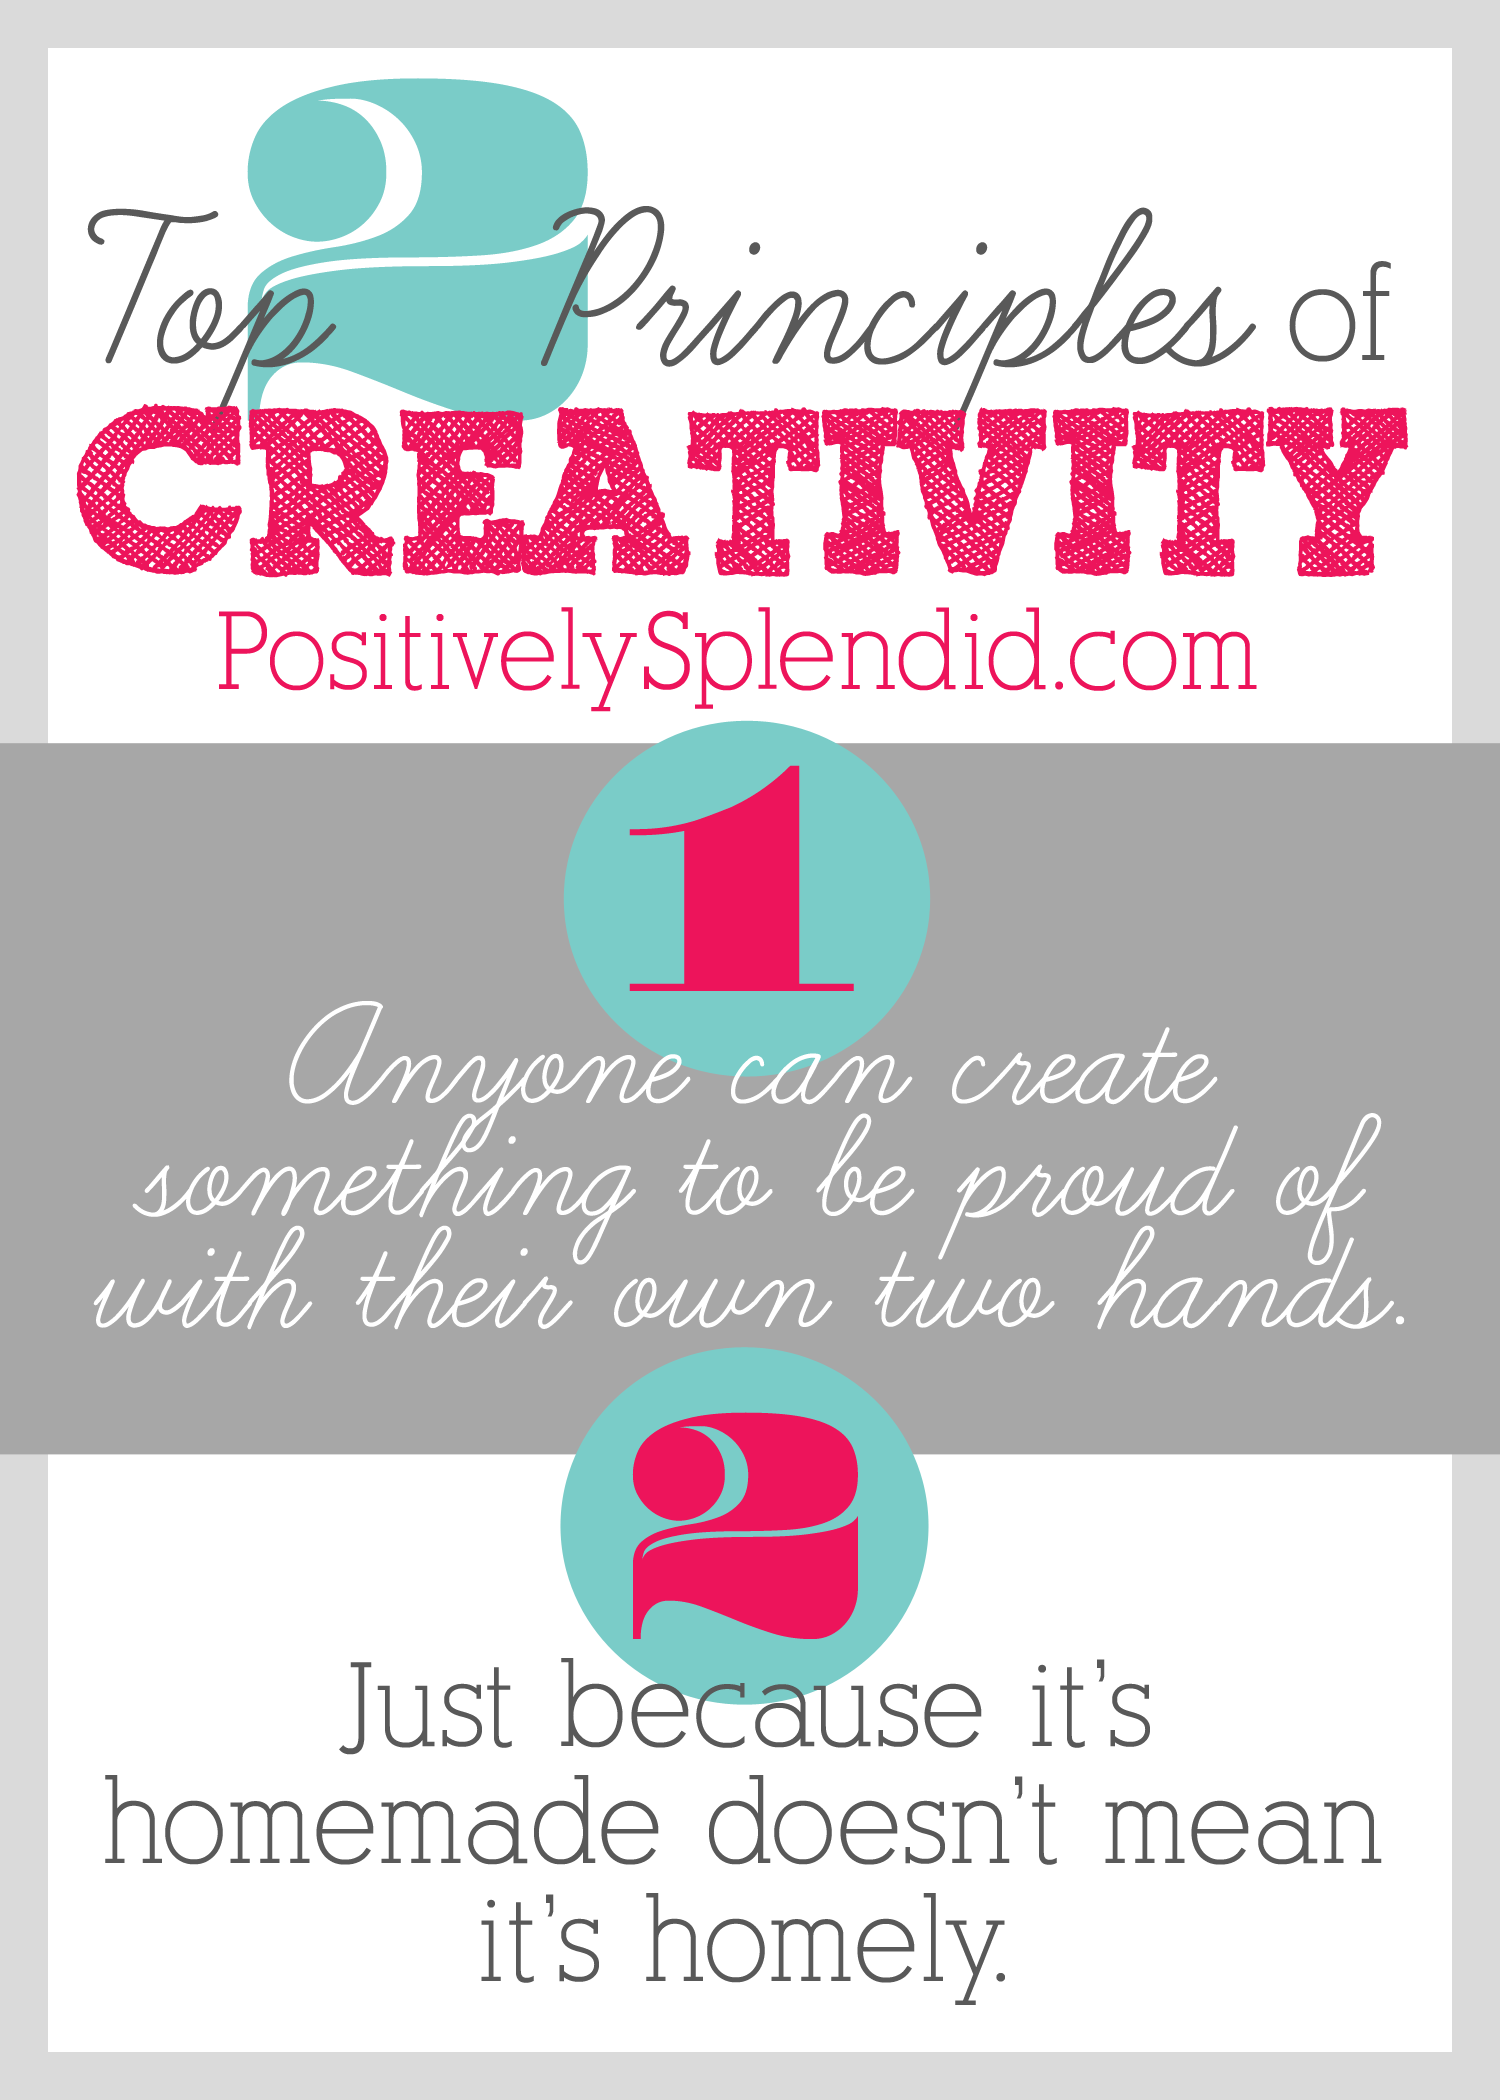 My Top 2 Pieces of Creative Advice at Positively Splendid